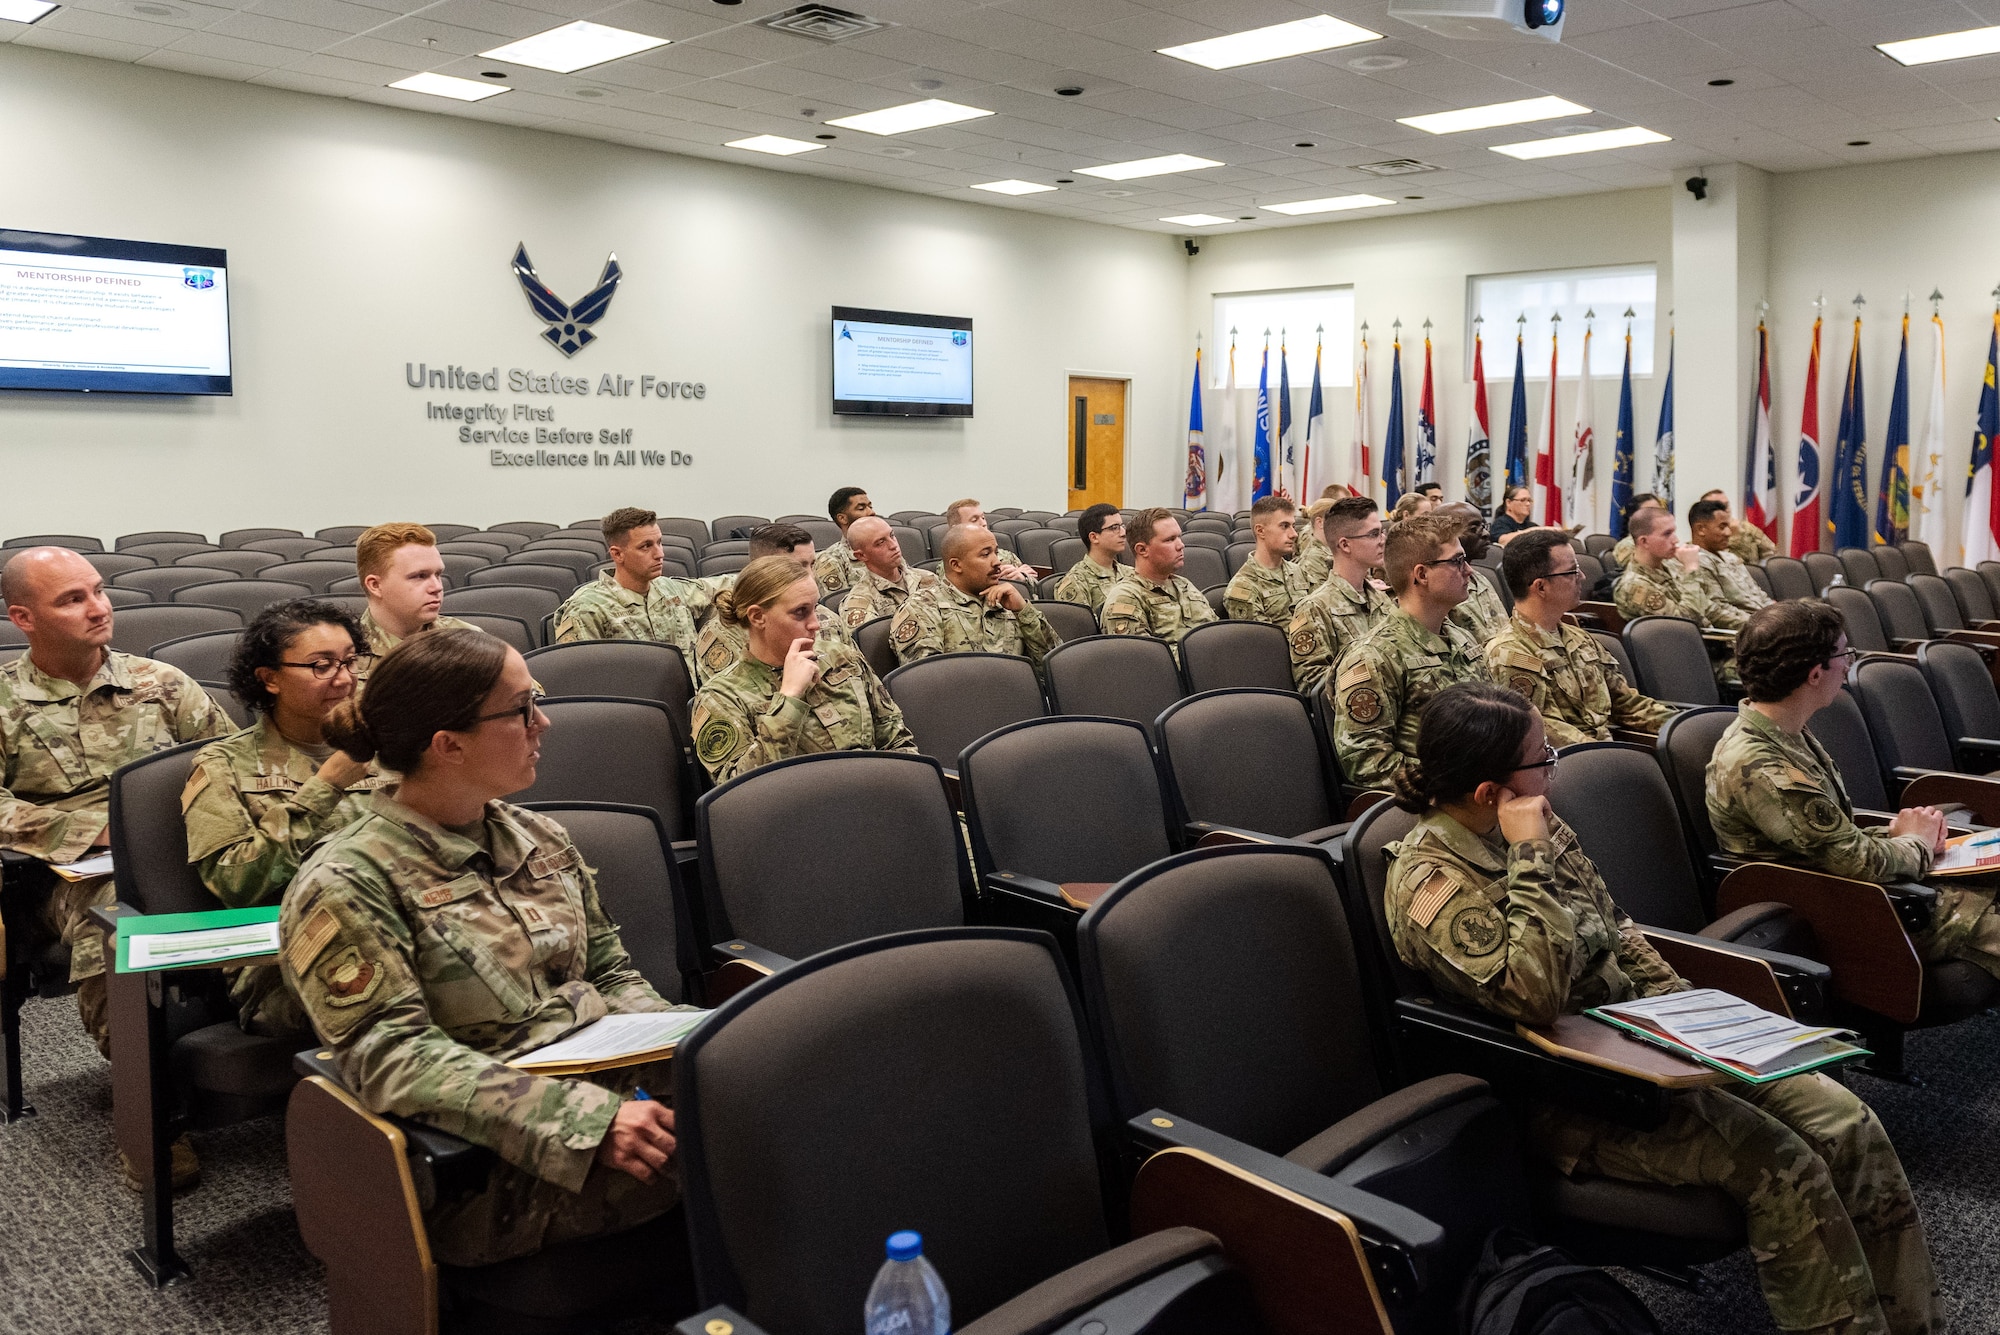 Space Launch Delta 45 rolls out a new First Term Airman and Guardian Course mentorship program called ‘Everyone Wins with Mentoring’ on Oct. 13, 2022. The program paired up 13 mentees with 15 mentors and will run for 4 months. (U.S. Space Force photo by Deanna Murano)